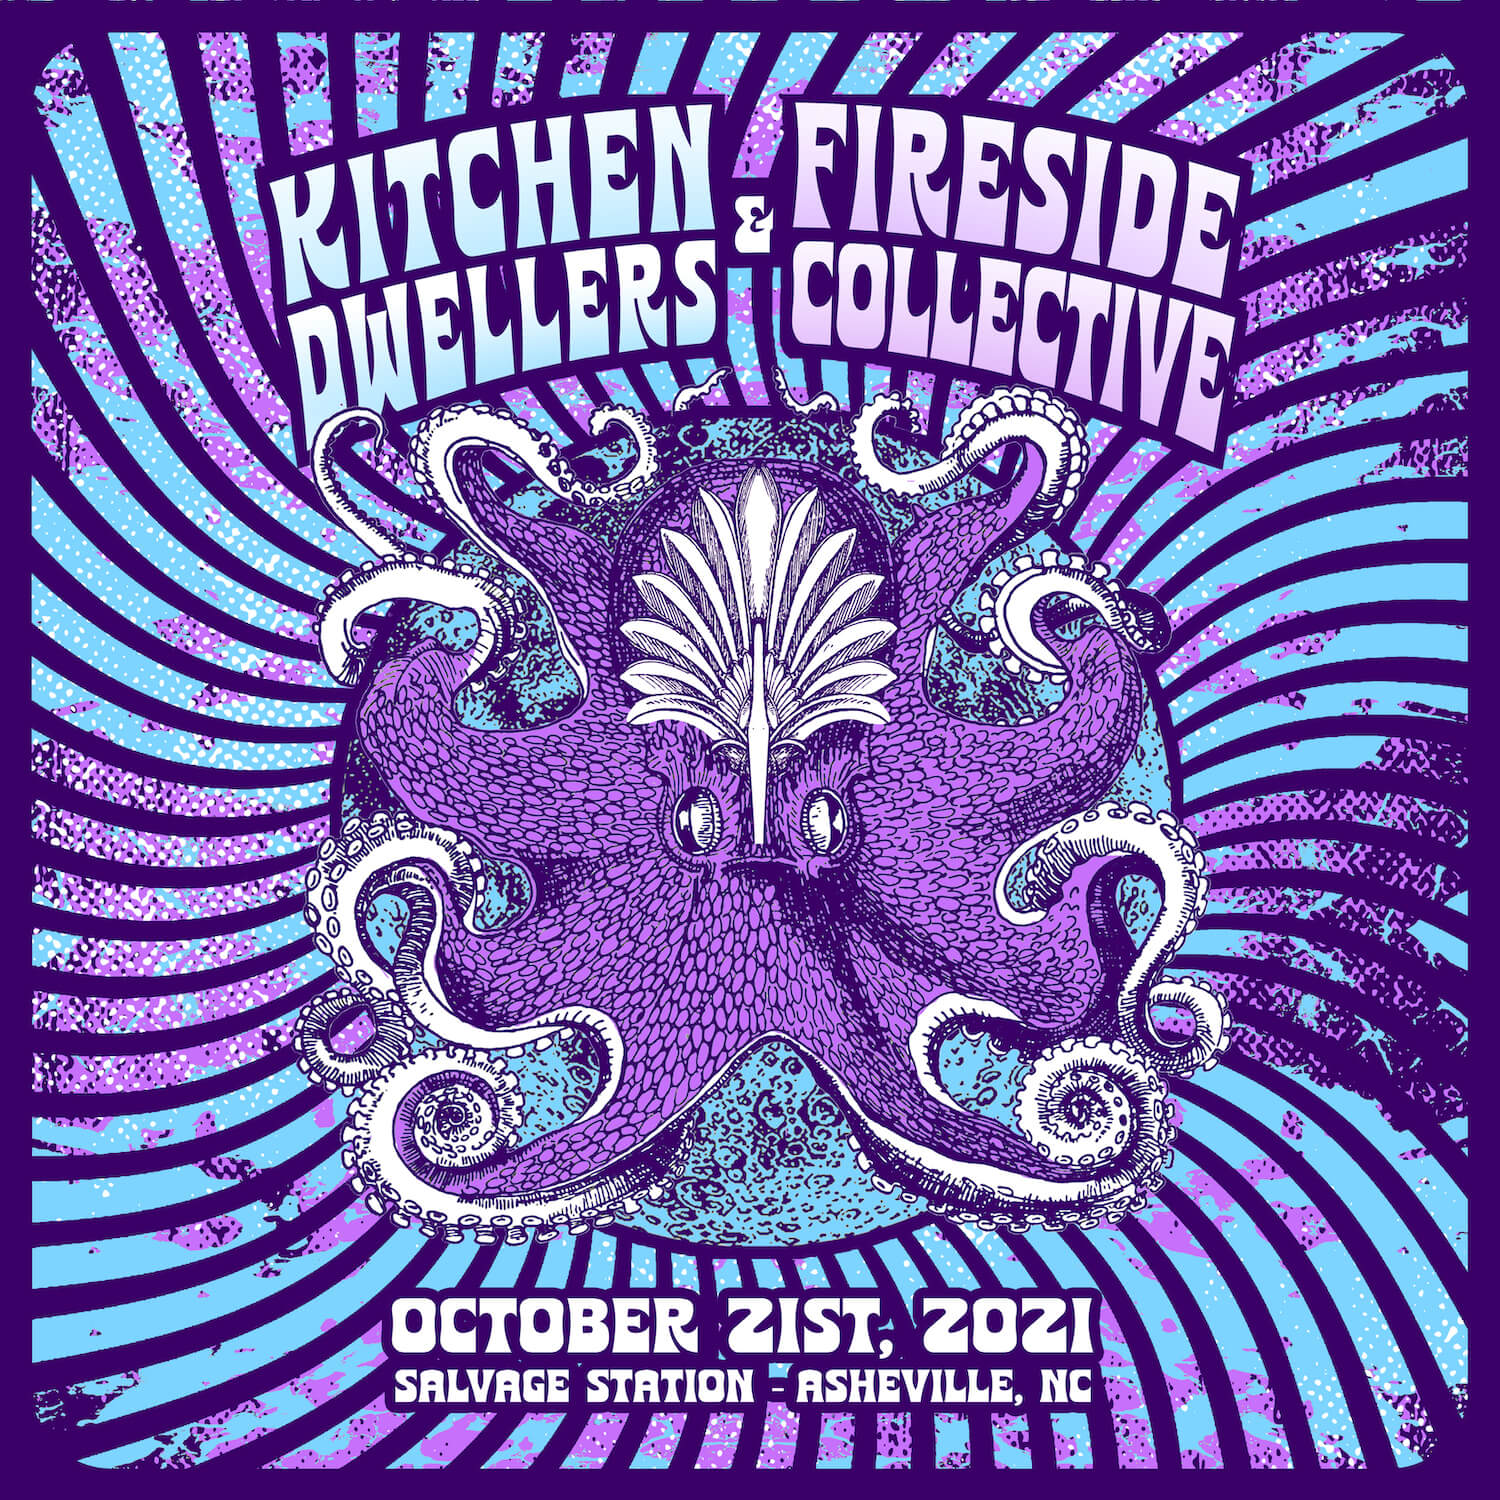 Kitchen Dwellers and Fireside Collective